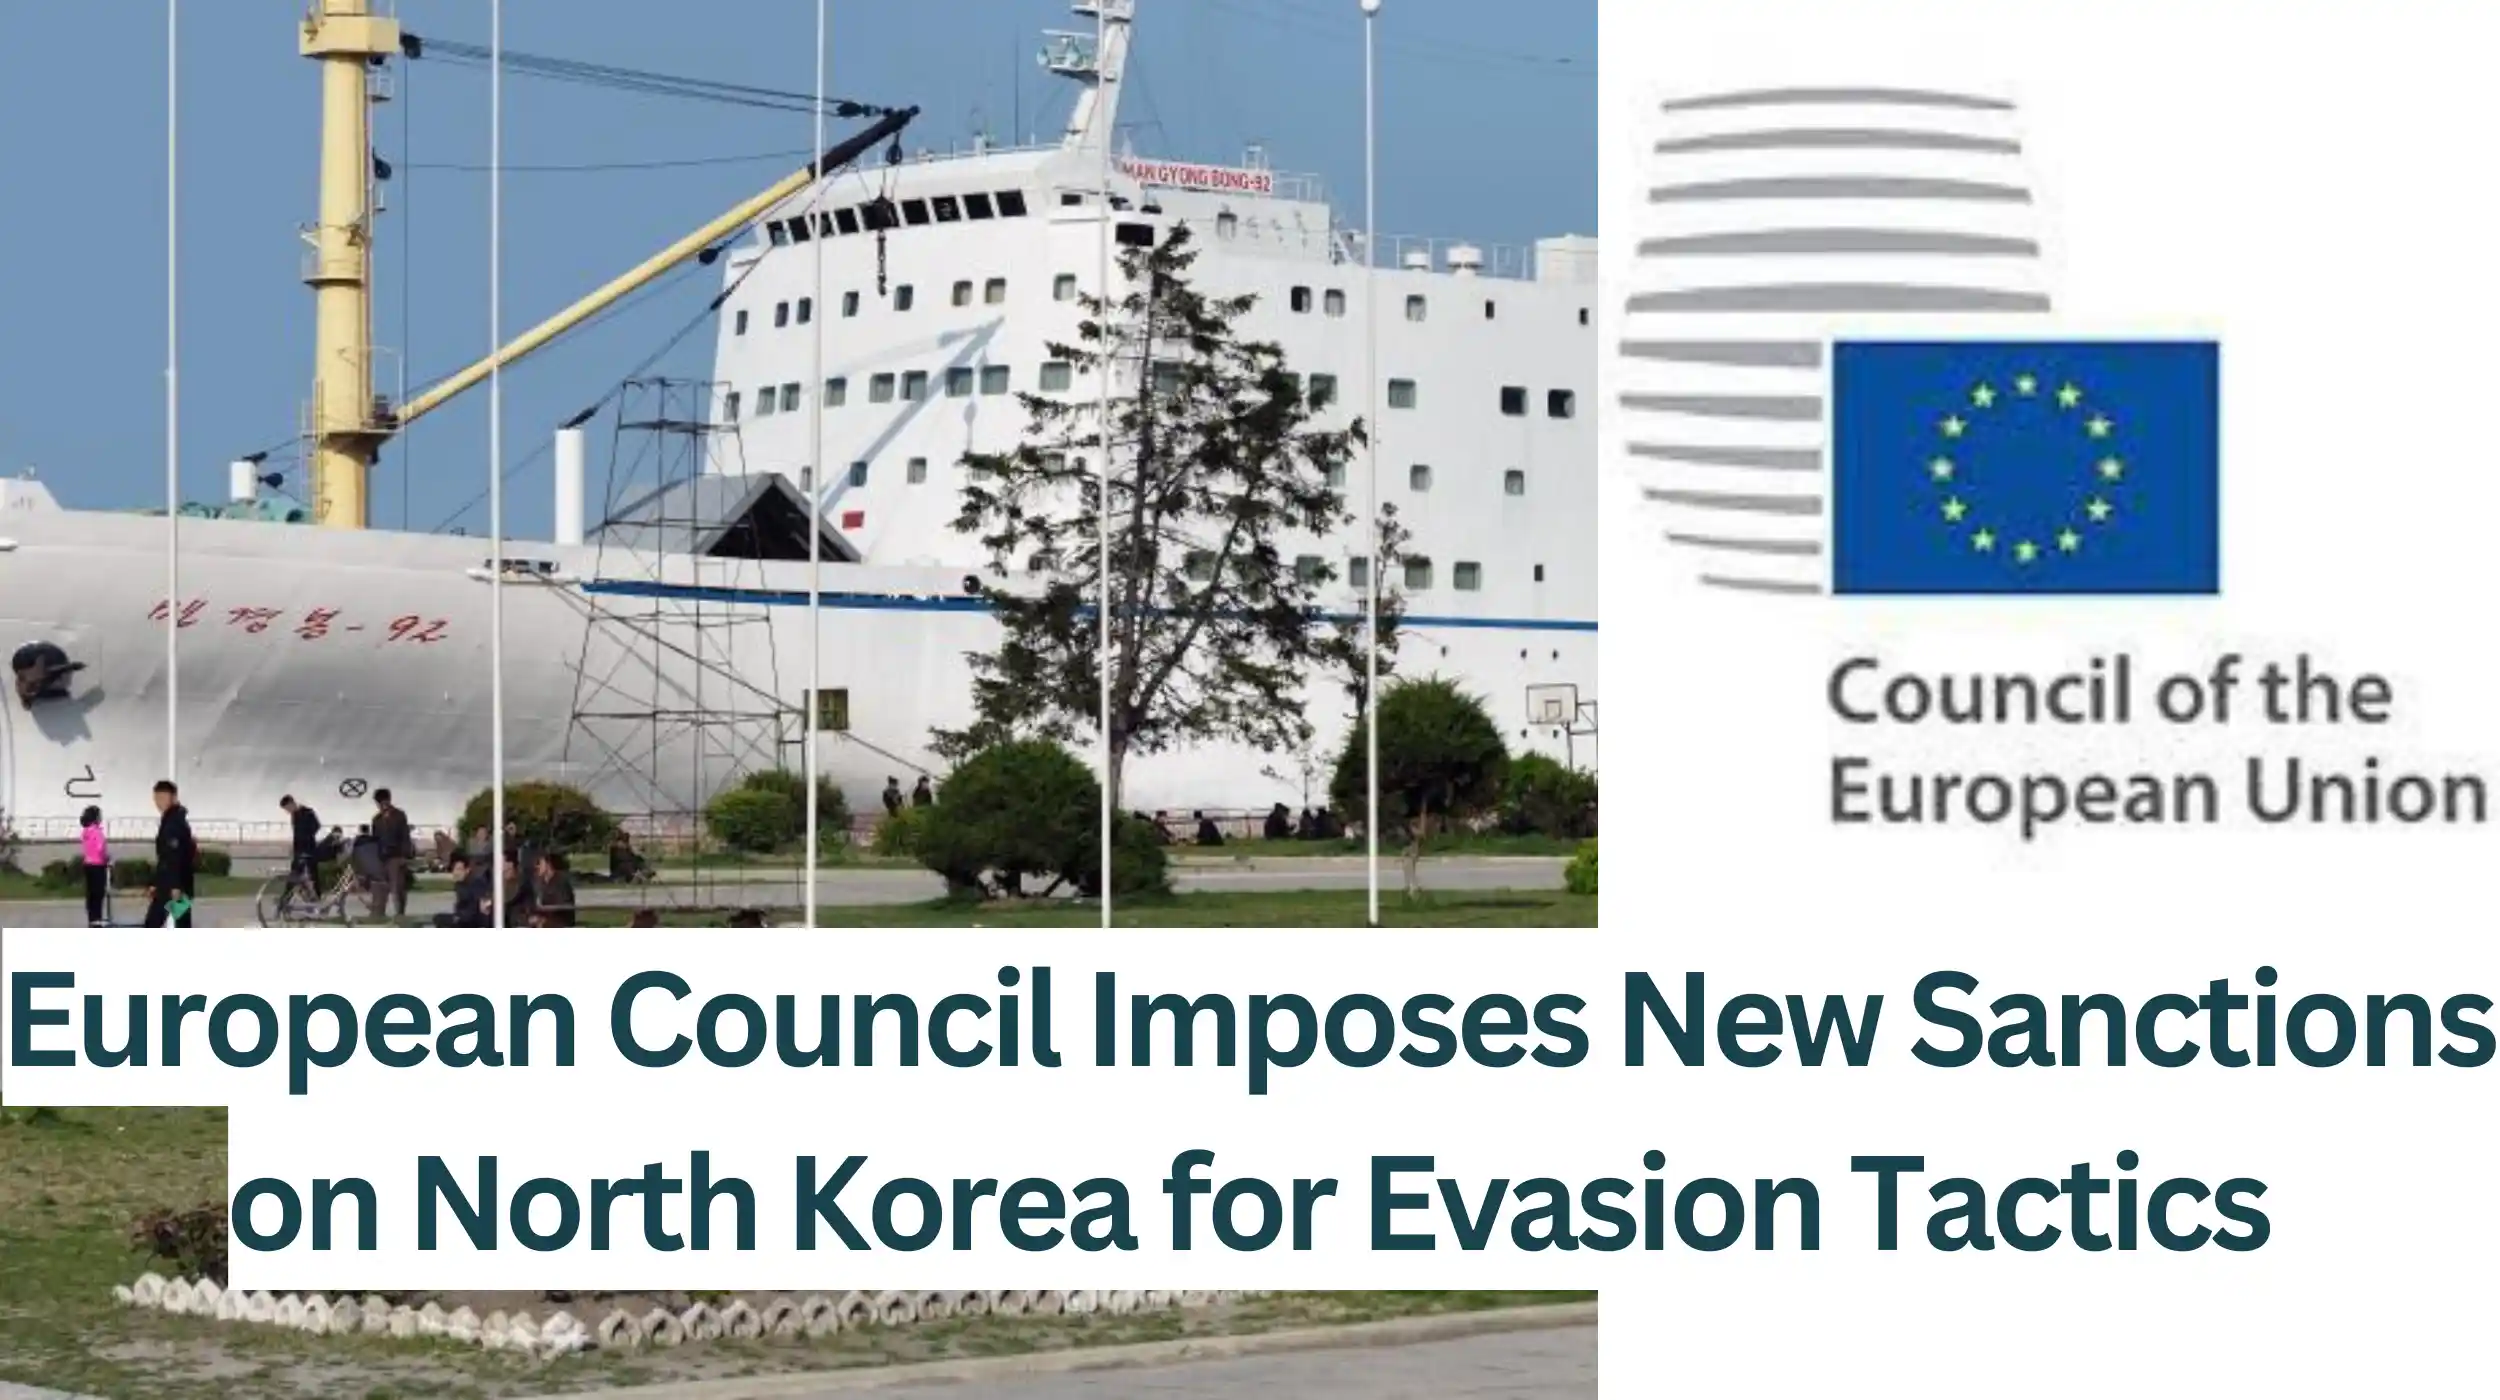 European-Council-Imposes-New-Sanctions-on-North-Korea